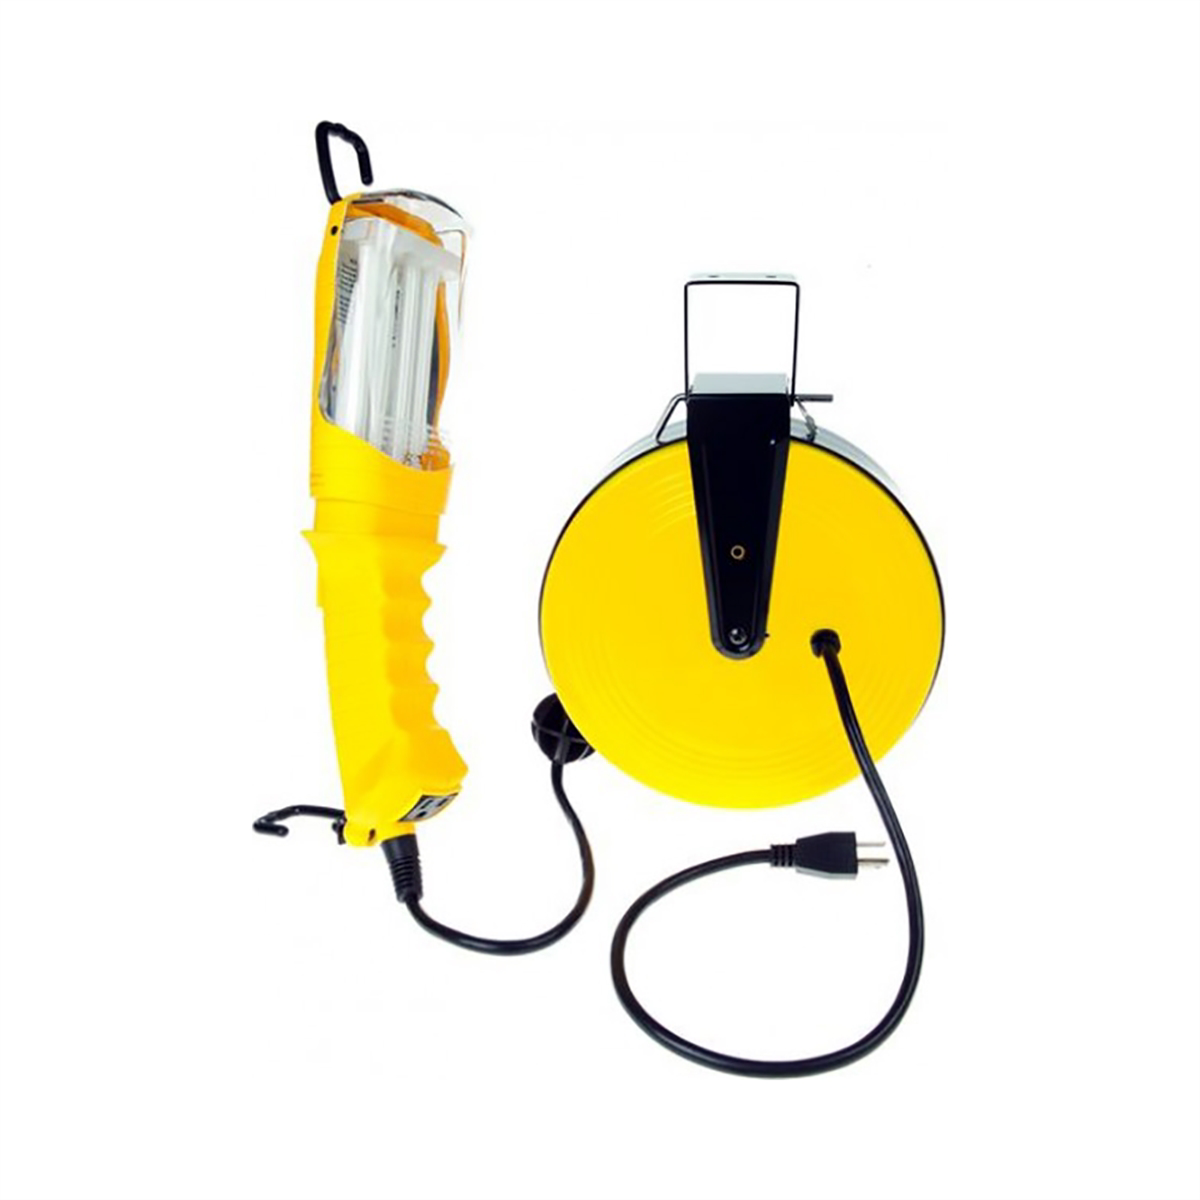 Bayco SL-800 Professional Retractable Reel with 30-Foot Triple Tap, Yellow